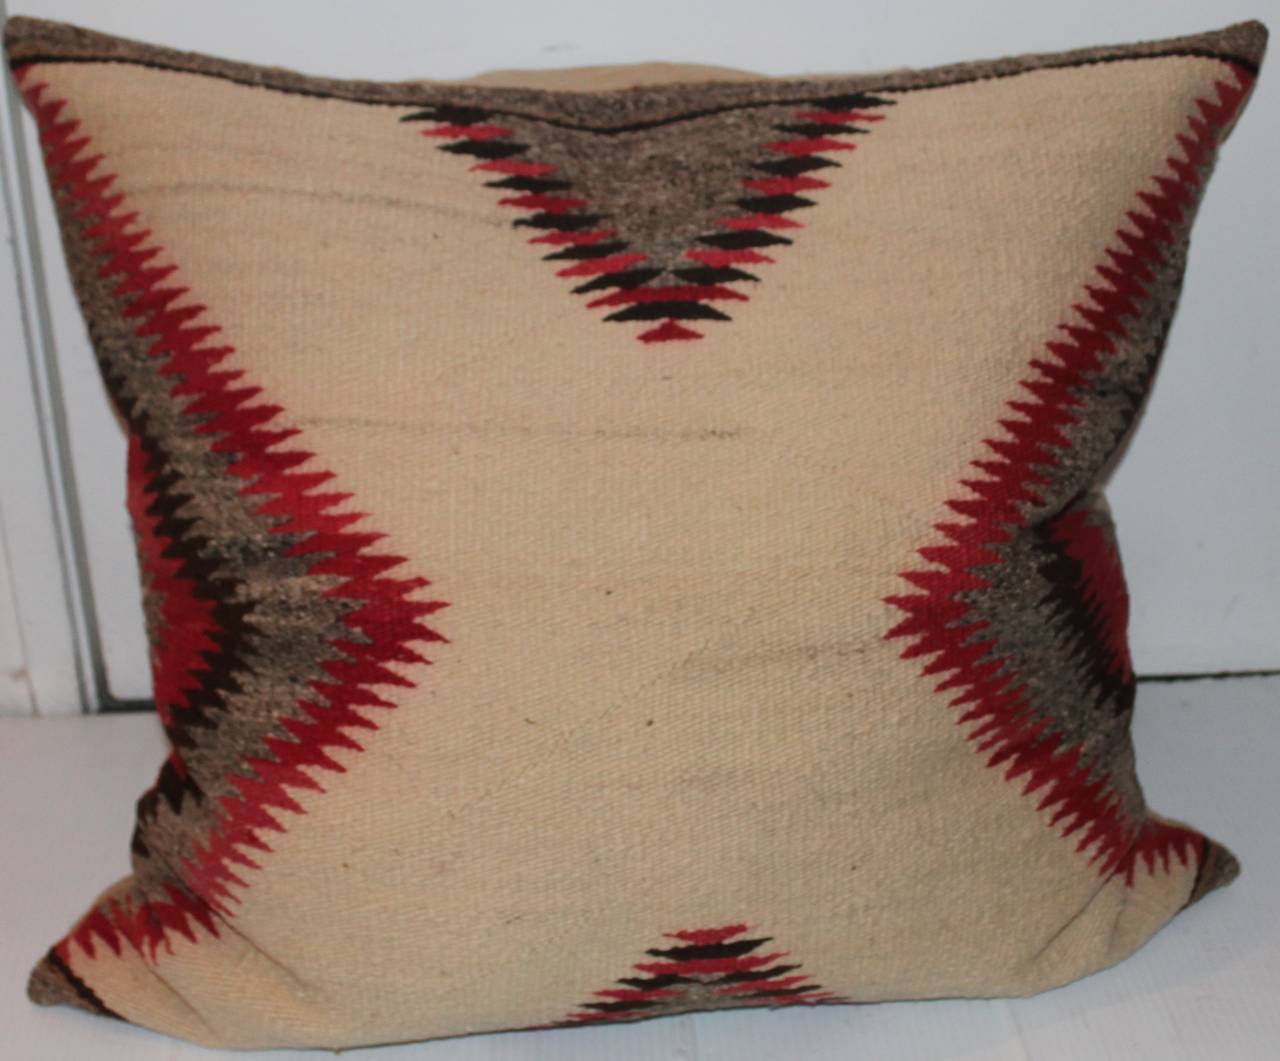 Fantastic feather edge weaving pillow in wonderful condition. This beauty has a antique tan cotton linen backing.